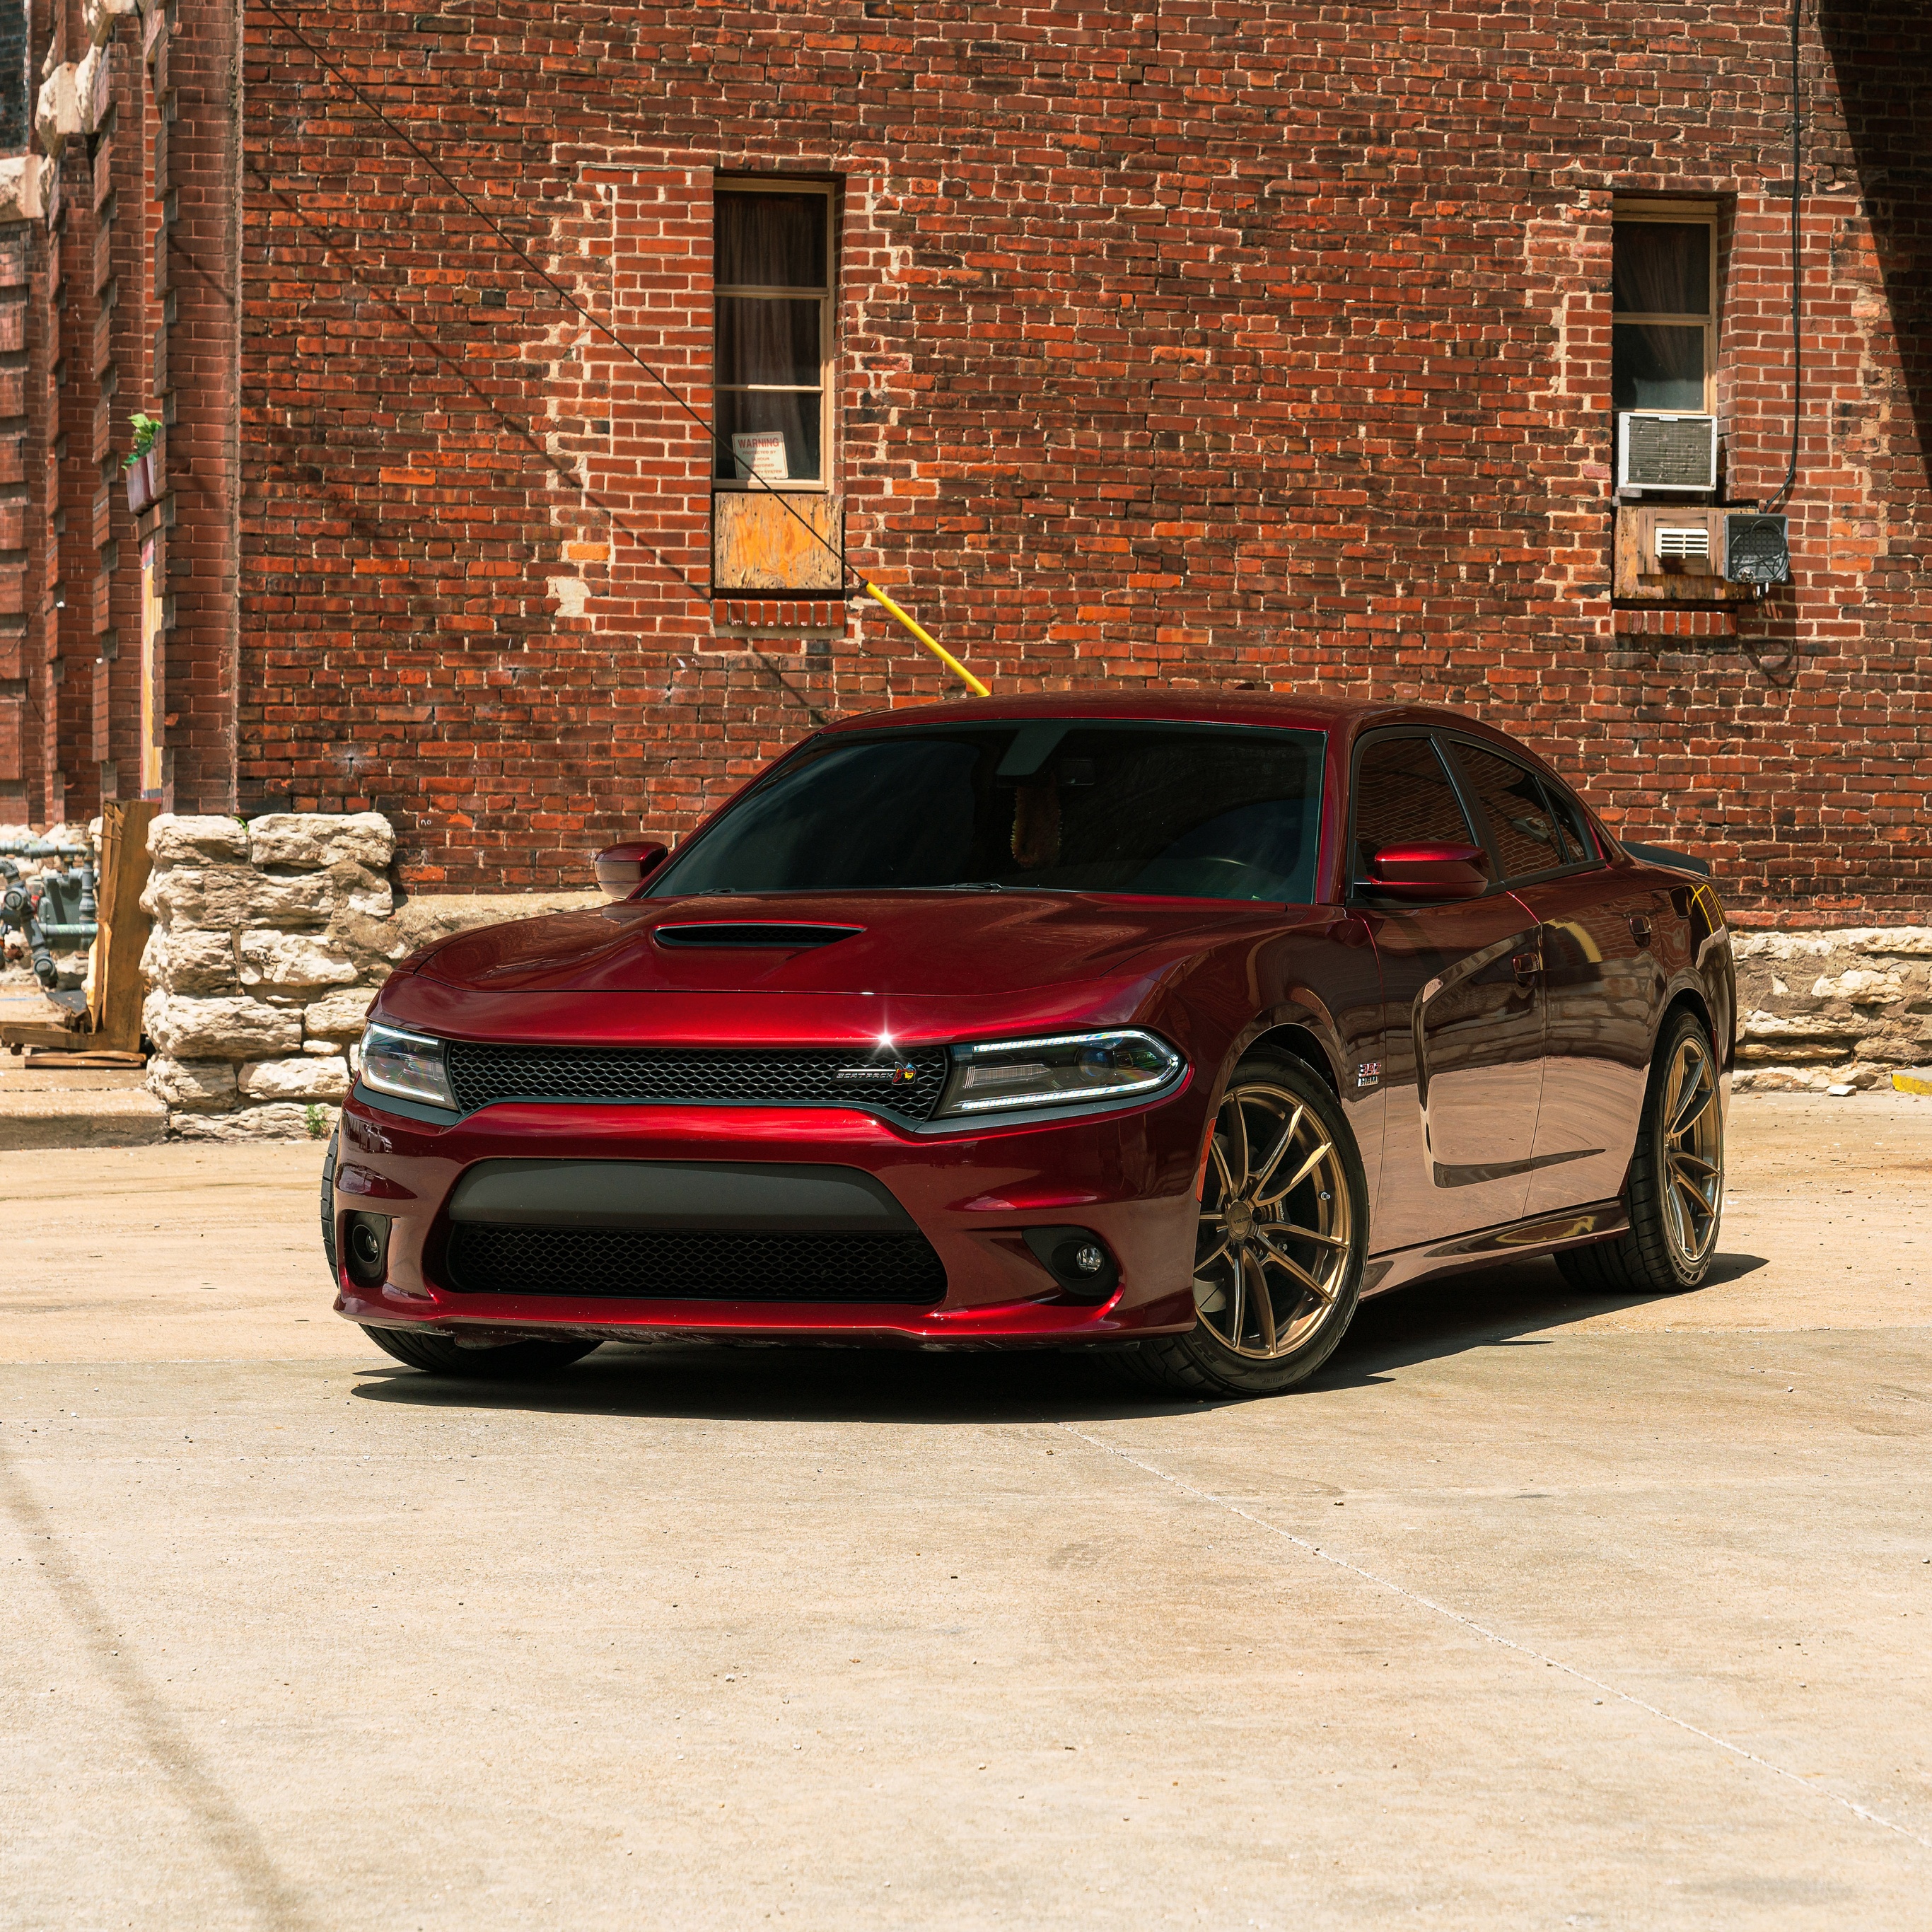 Dodge Charger Wallpaper. 